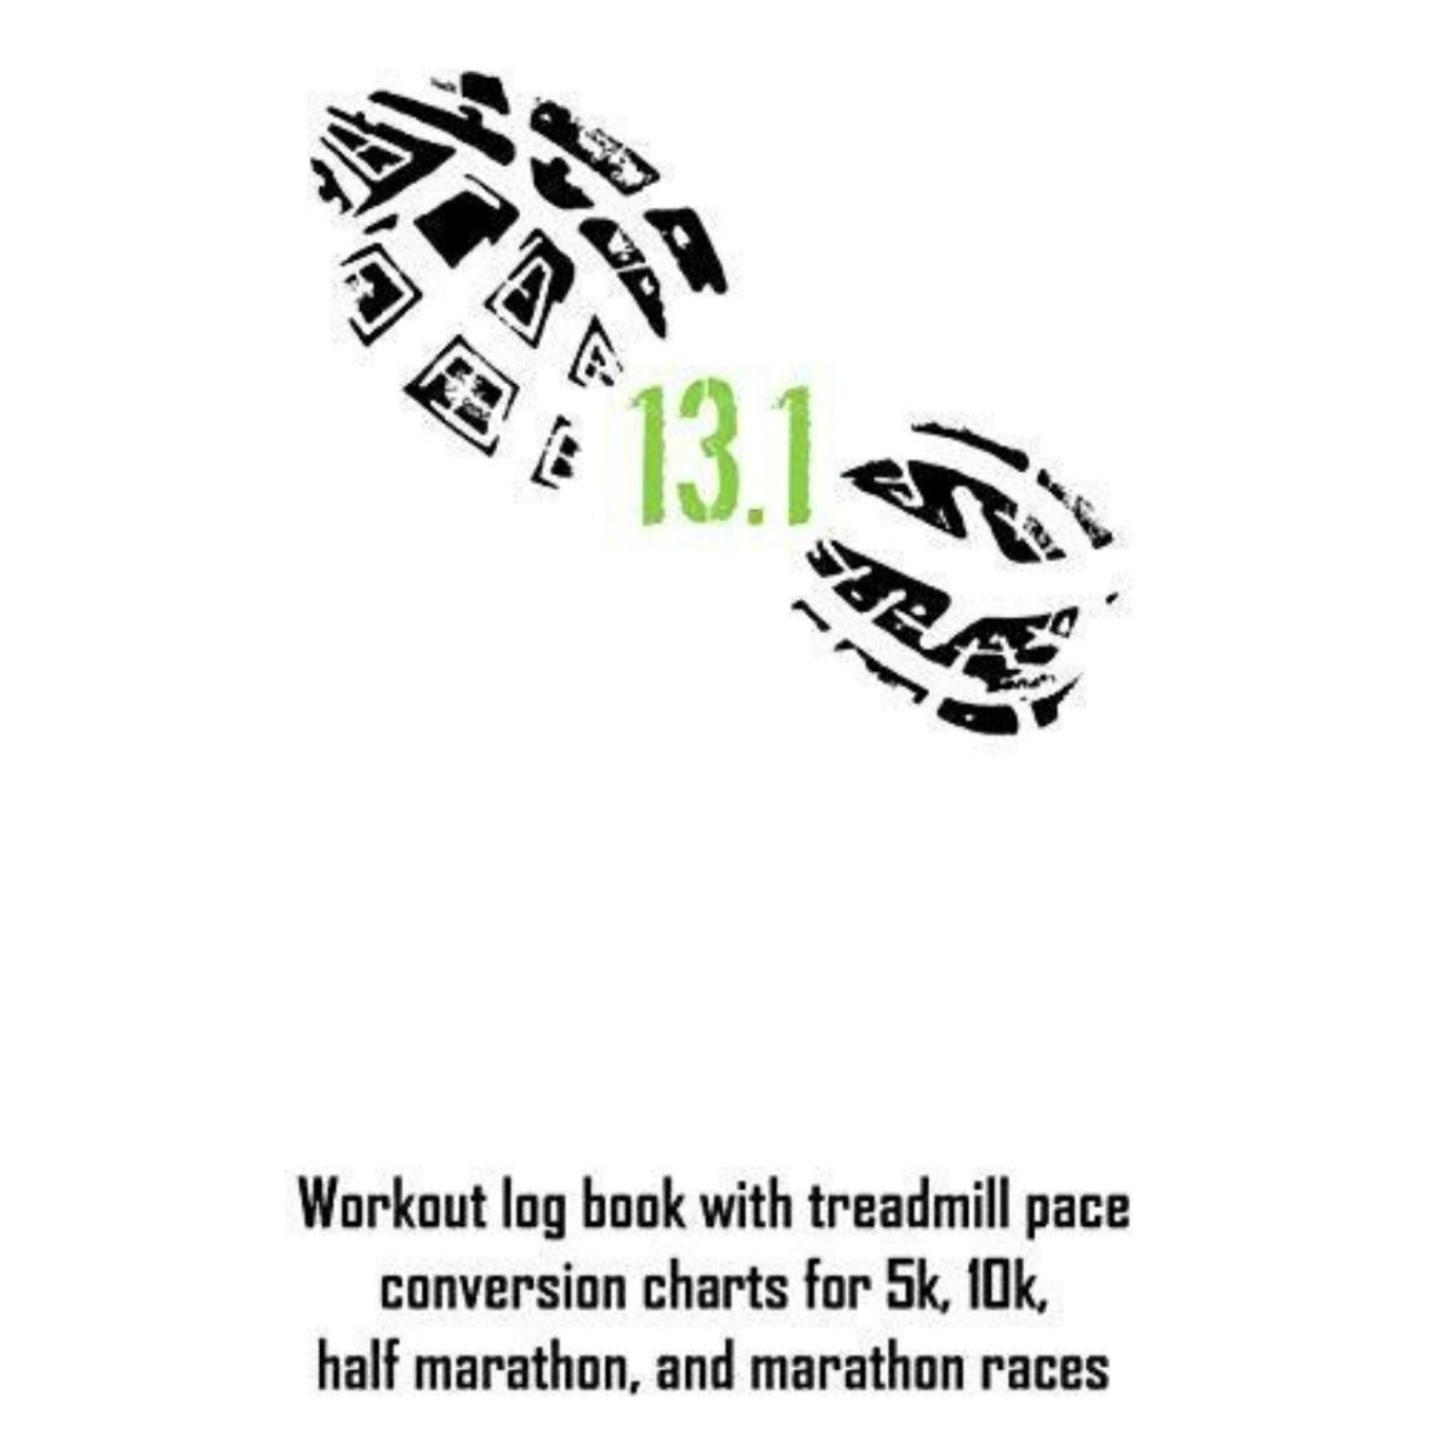 "Workout log book with treadmill pace conversion charts for 5k, 10k, half marathon, and marathon races"